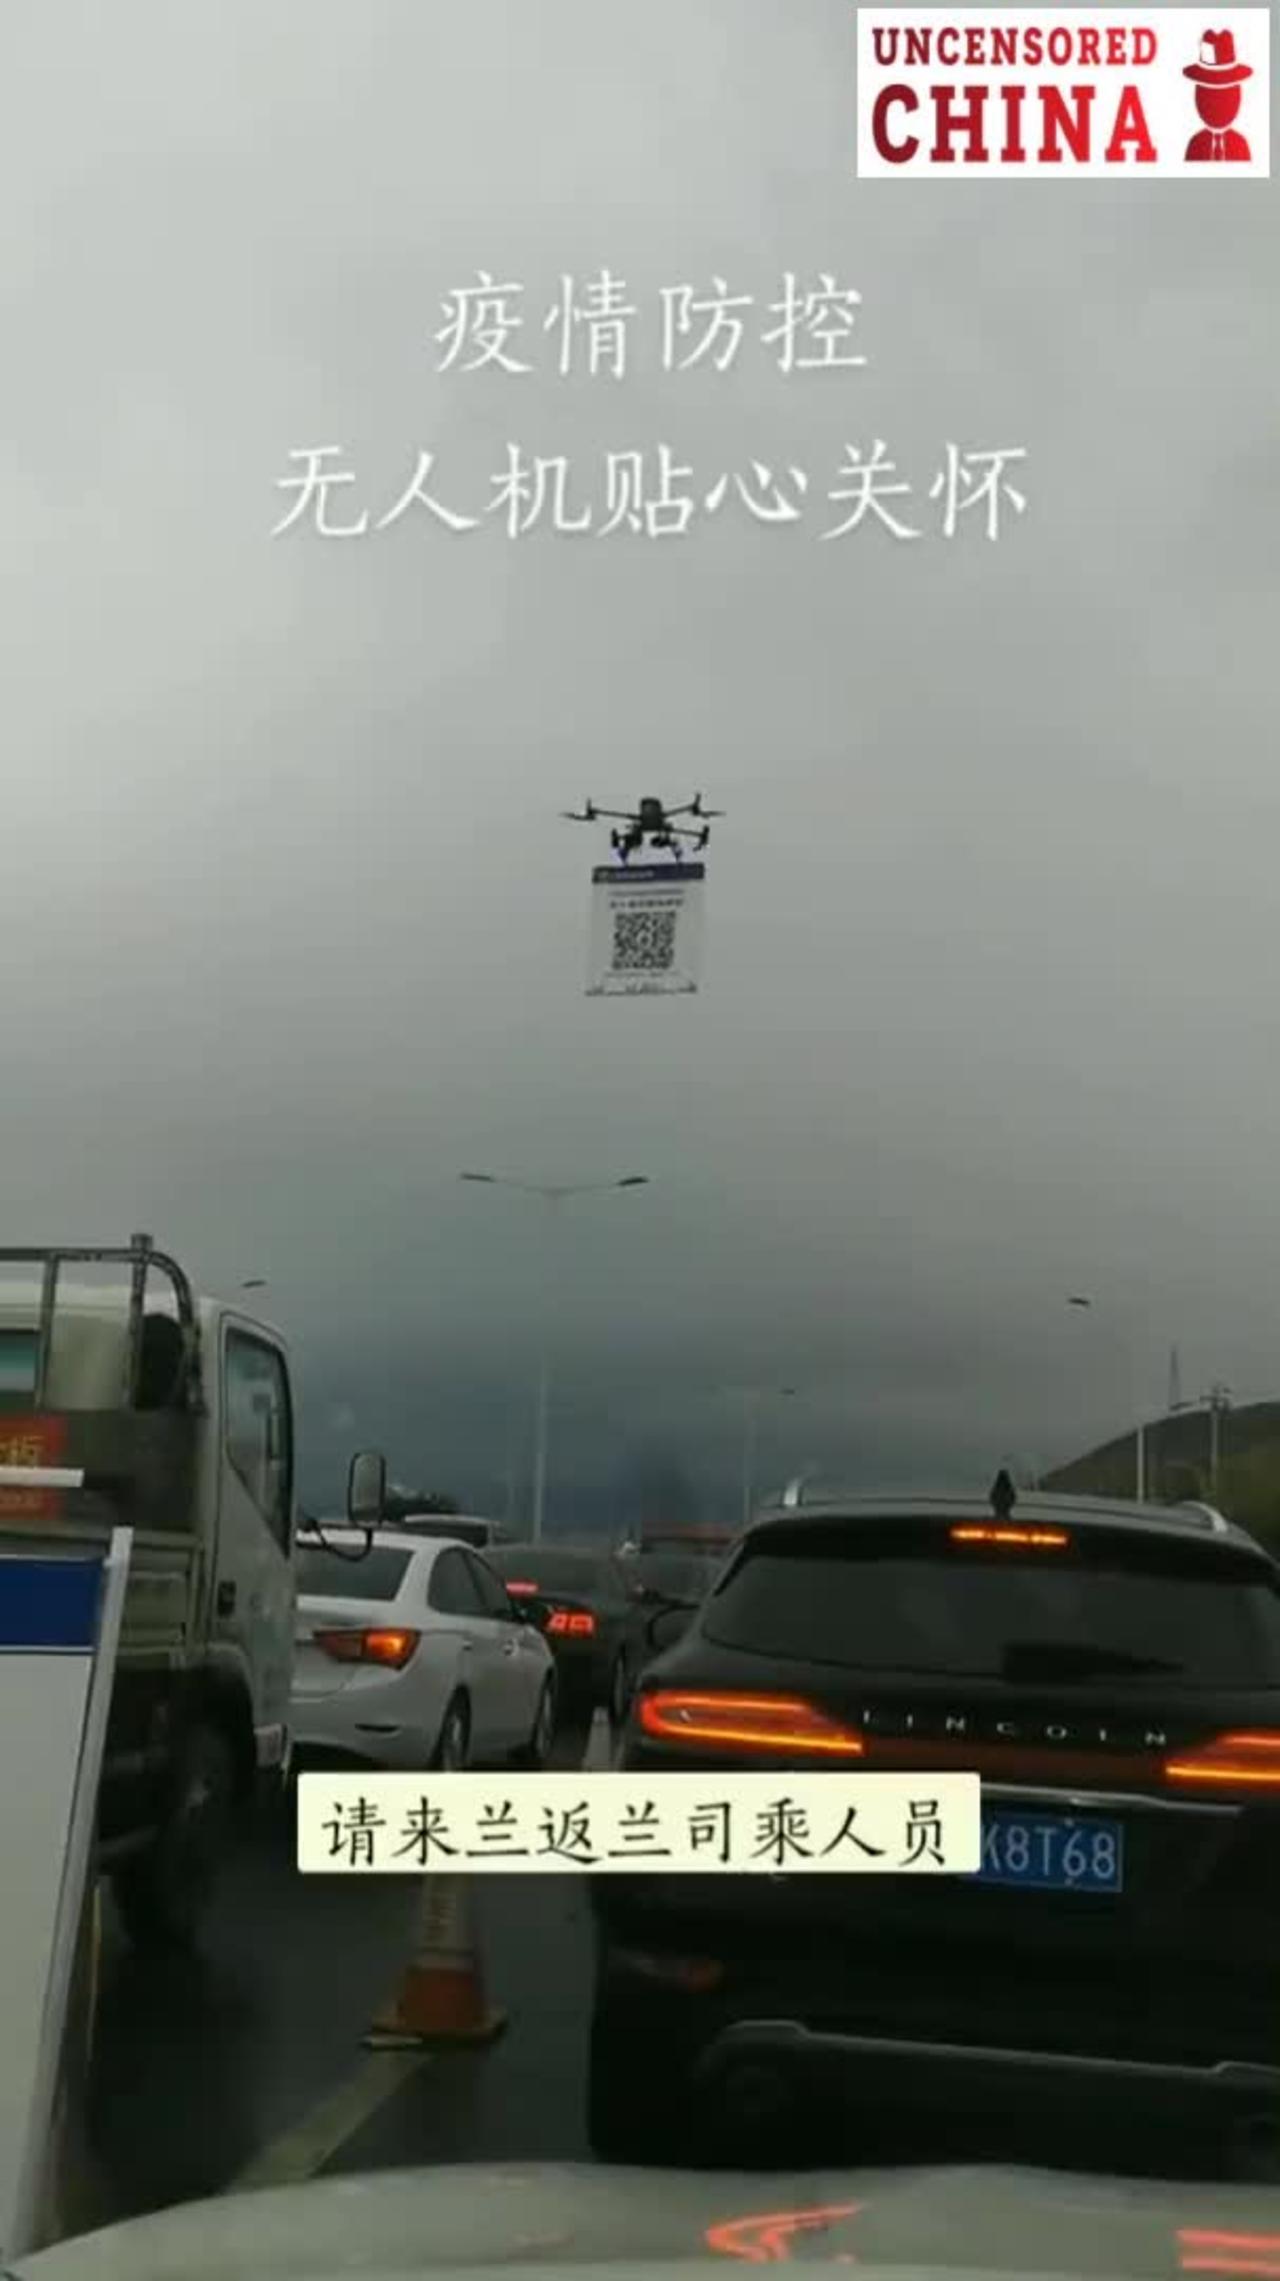 China:a police drone comes towards you on the highway, quickly scan your QR code